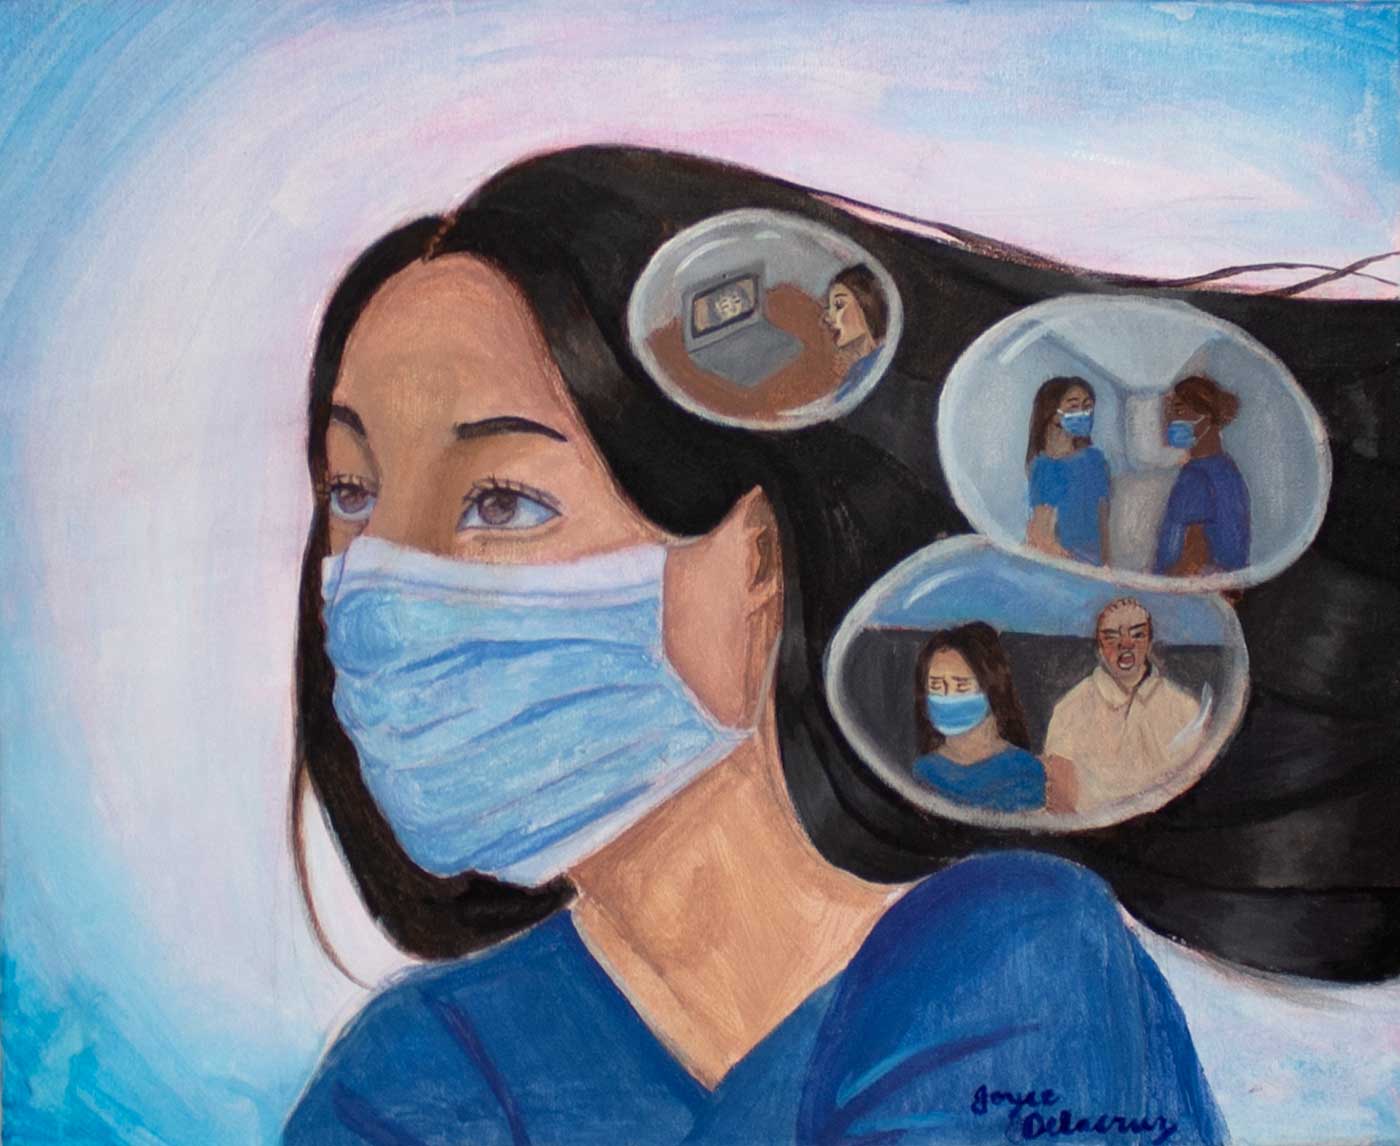 Acrylic painting of a medium-light skinned woman with long black hair wearing a mask and blue scrubs. Three thought bubbles depicting several scenes show the woman sitting in front of a computer, speaking with a person in a hallway, and looking down with her back towards a man.